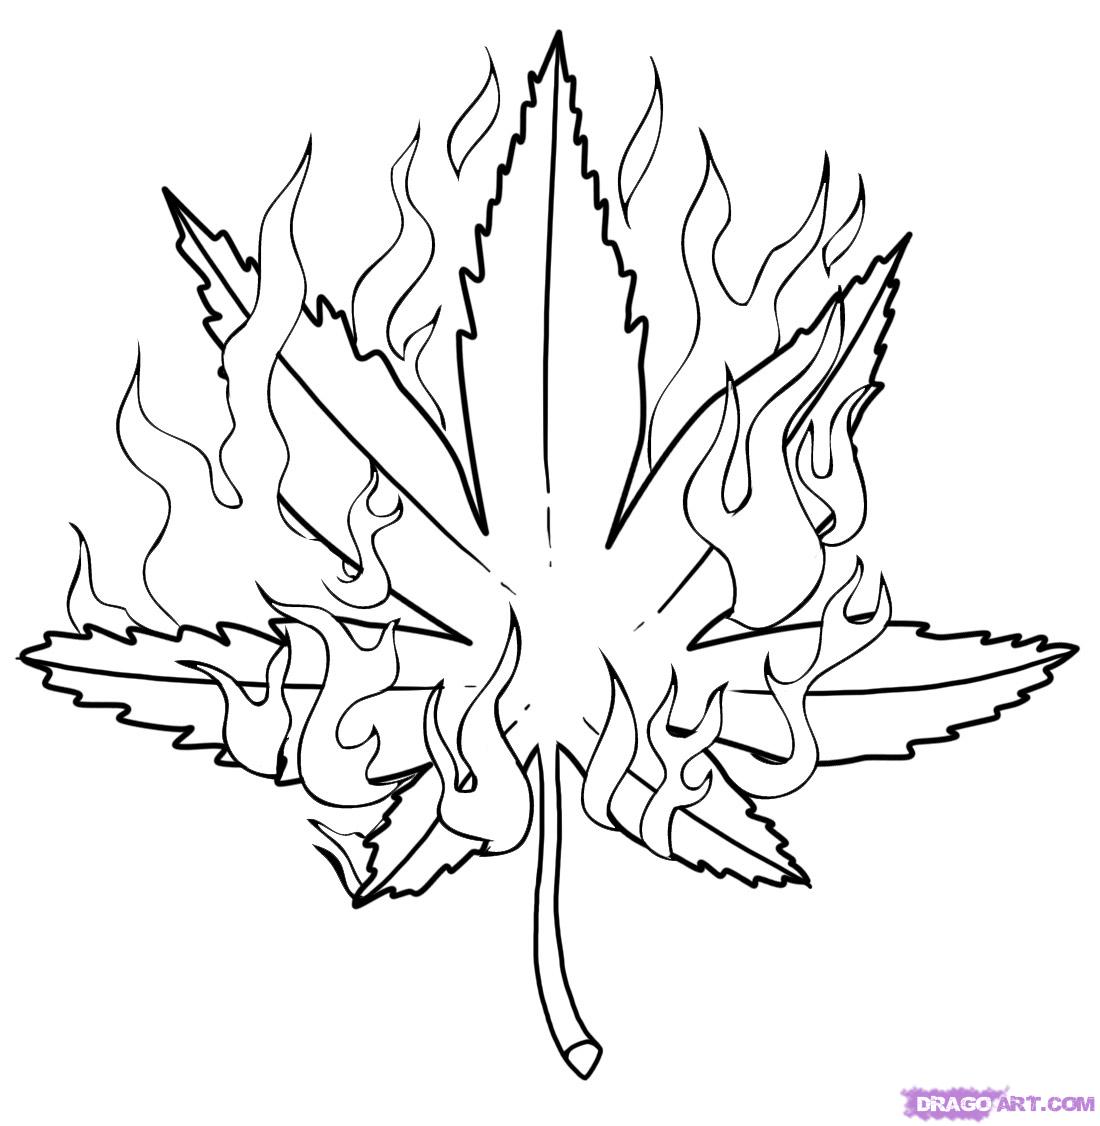 How to Draw a Pot Leaf, Step by Step, Tattoos, Pop Culture, FREE ...